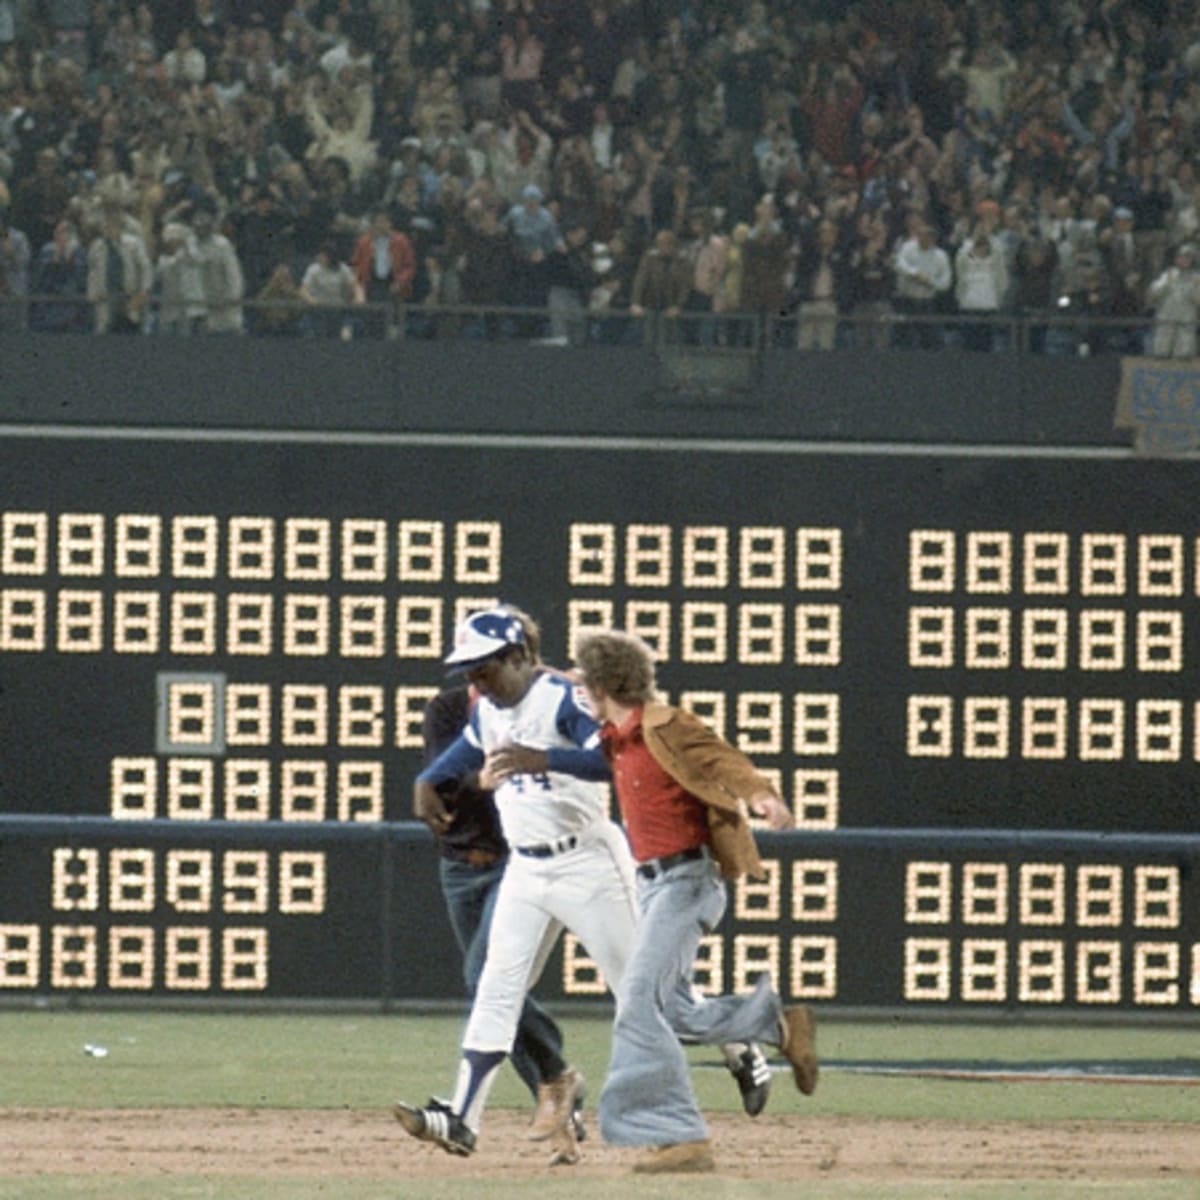 Hank Aaron's anguish leading up to record home run No. 715 - Los